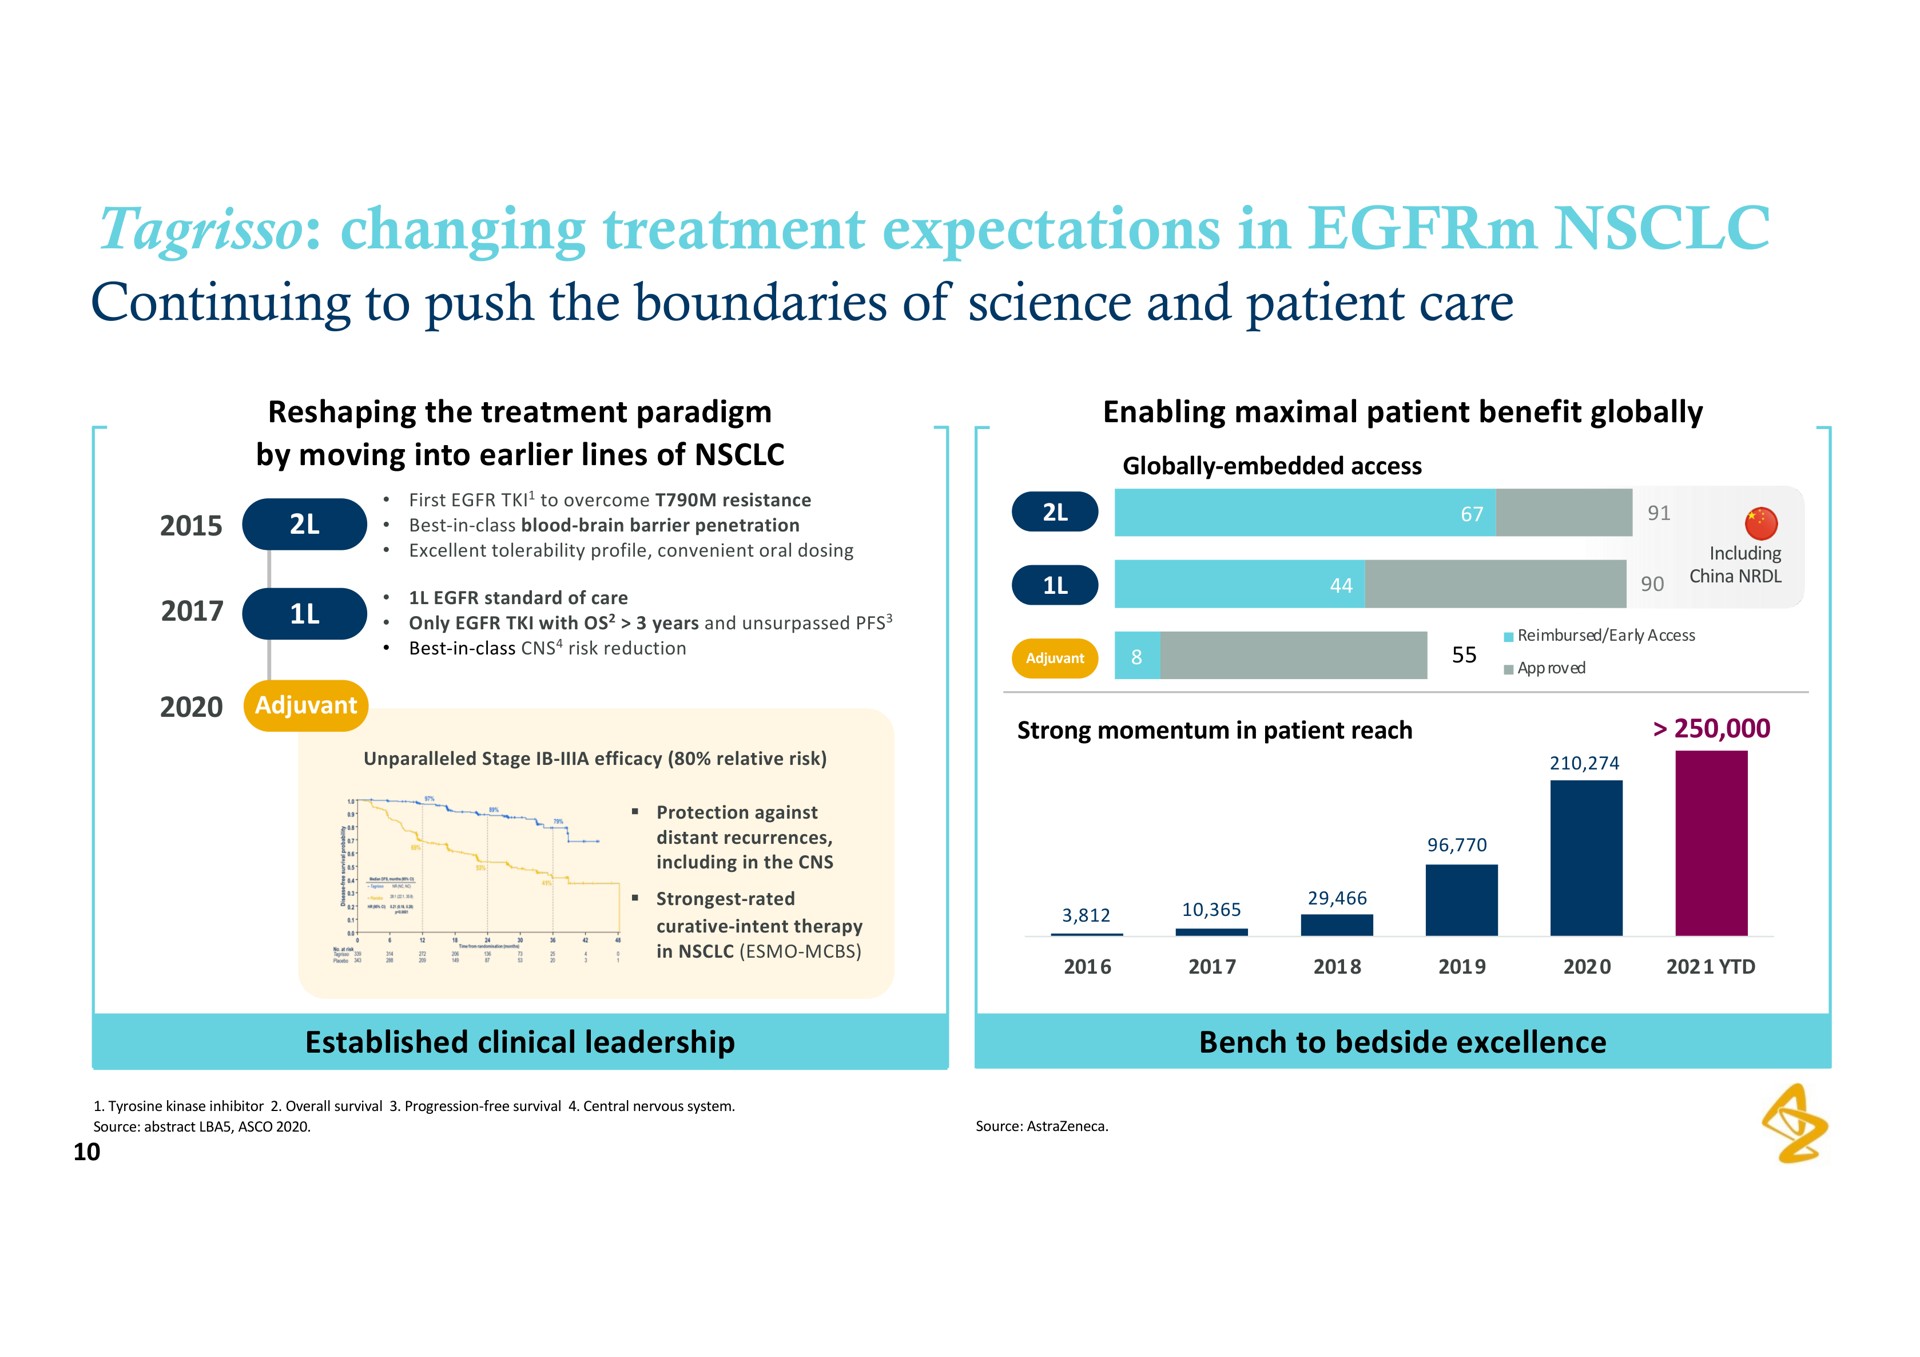 changing treatment expectations in continuing to push the boundaries of science and patient care | AstraZeneca